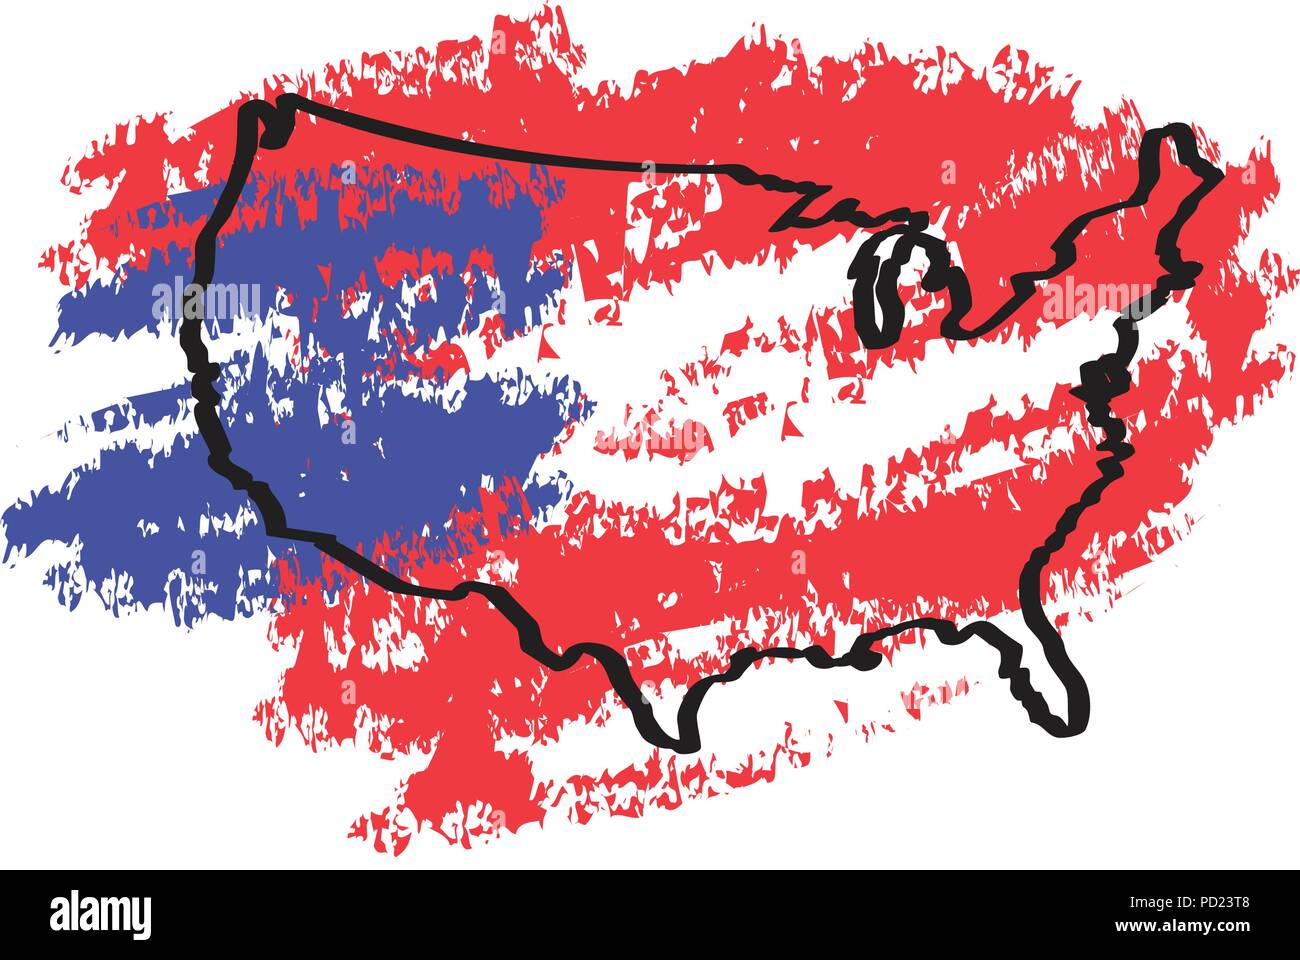 Sketch of a map of the United States Stock Vector